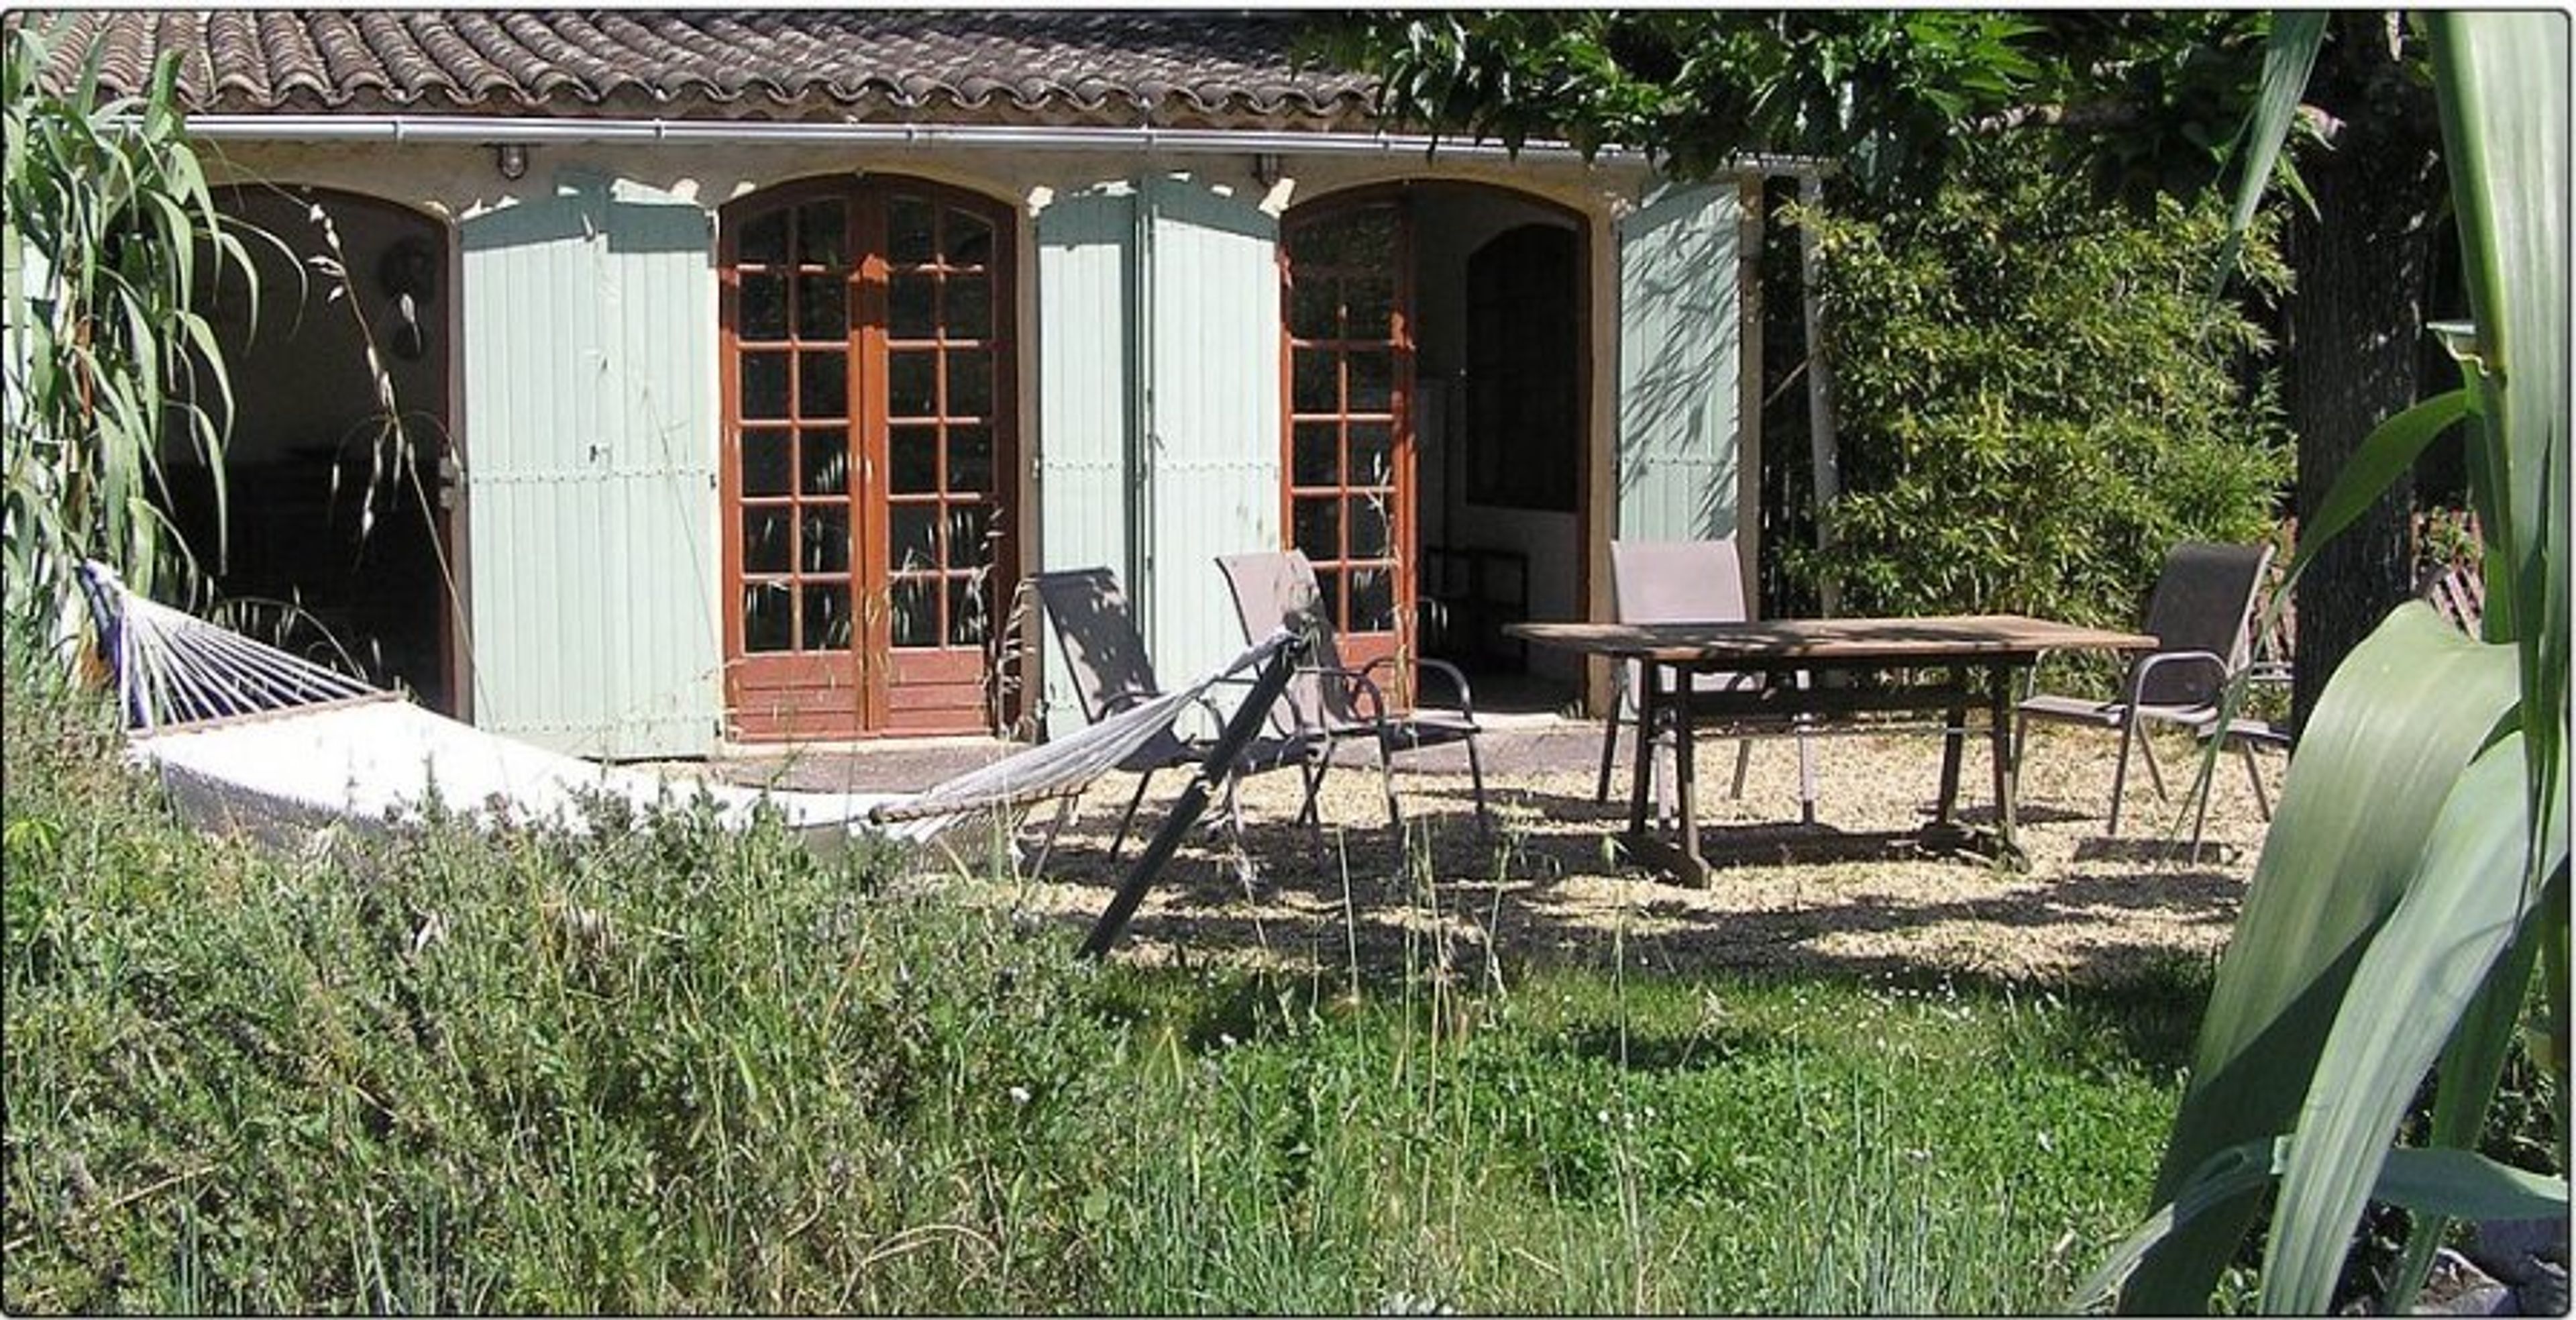 Bergerie gite, three bedrooms , direct access to your private garden.